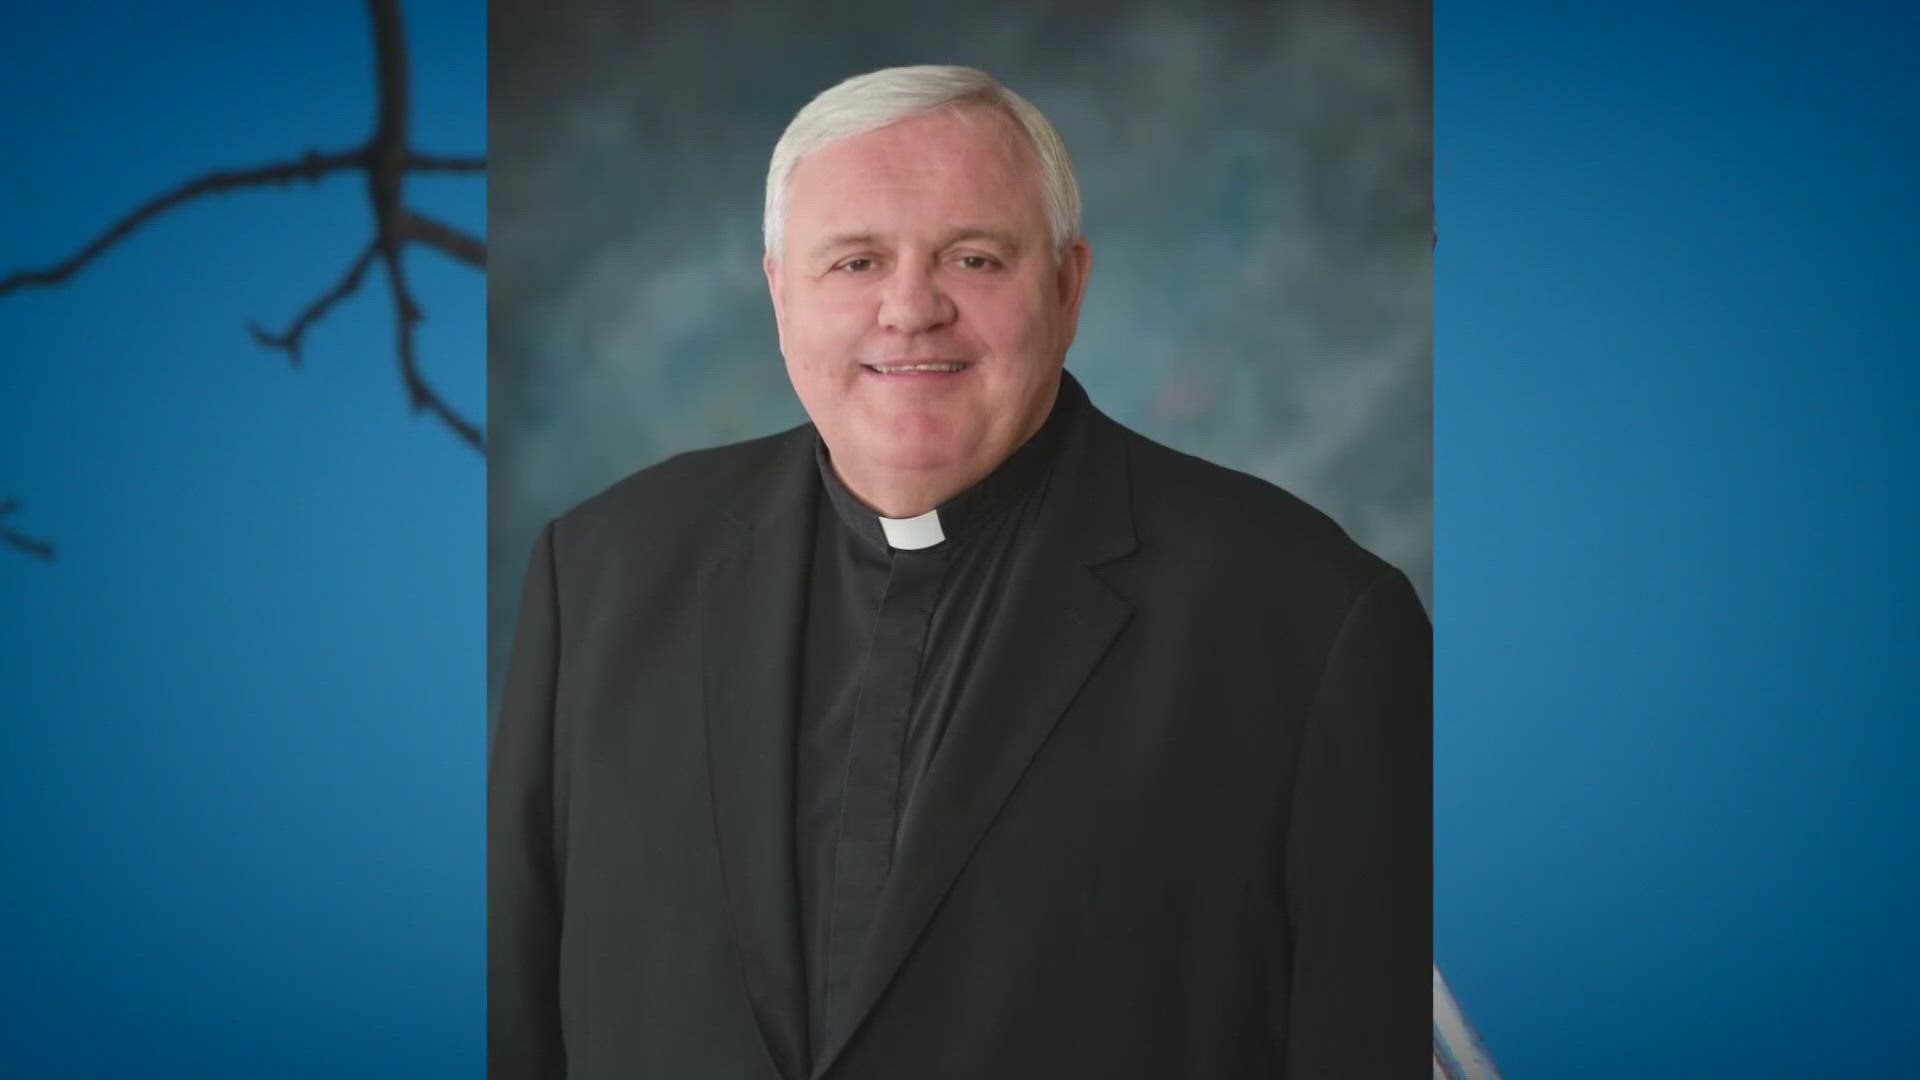 An internal investigation cleared Father Robert Vaillancourt of sexual abuse allegations brought by two women in the 1980s.